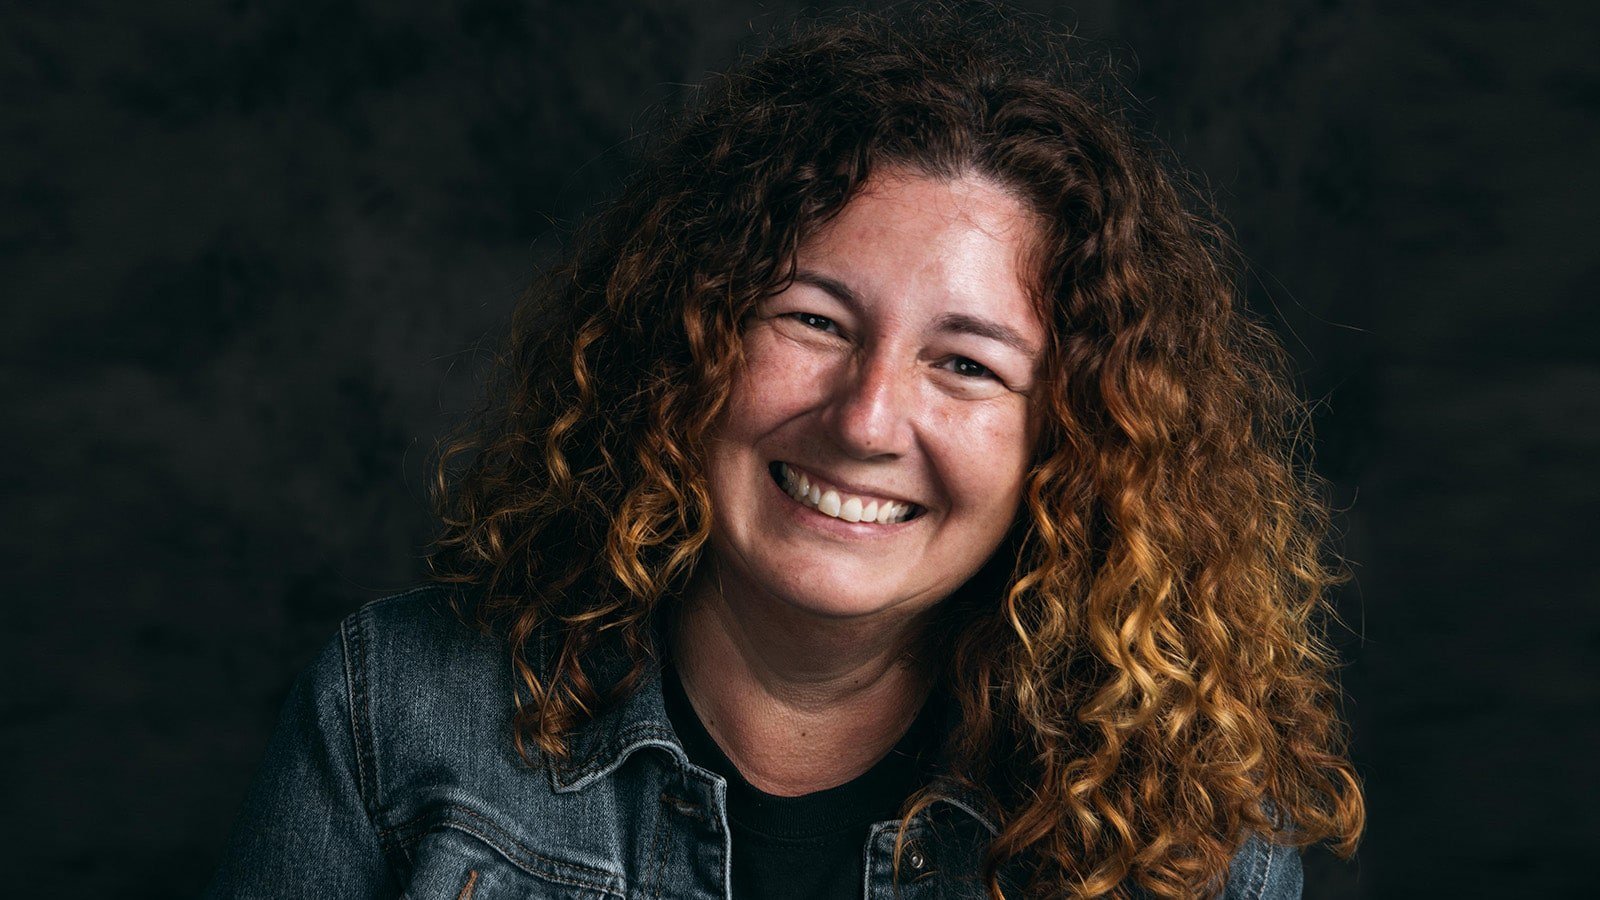 A woman with curly auburn hair smiling while wearing a black tee and denim jacket against a black backdrop.